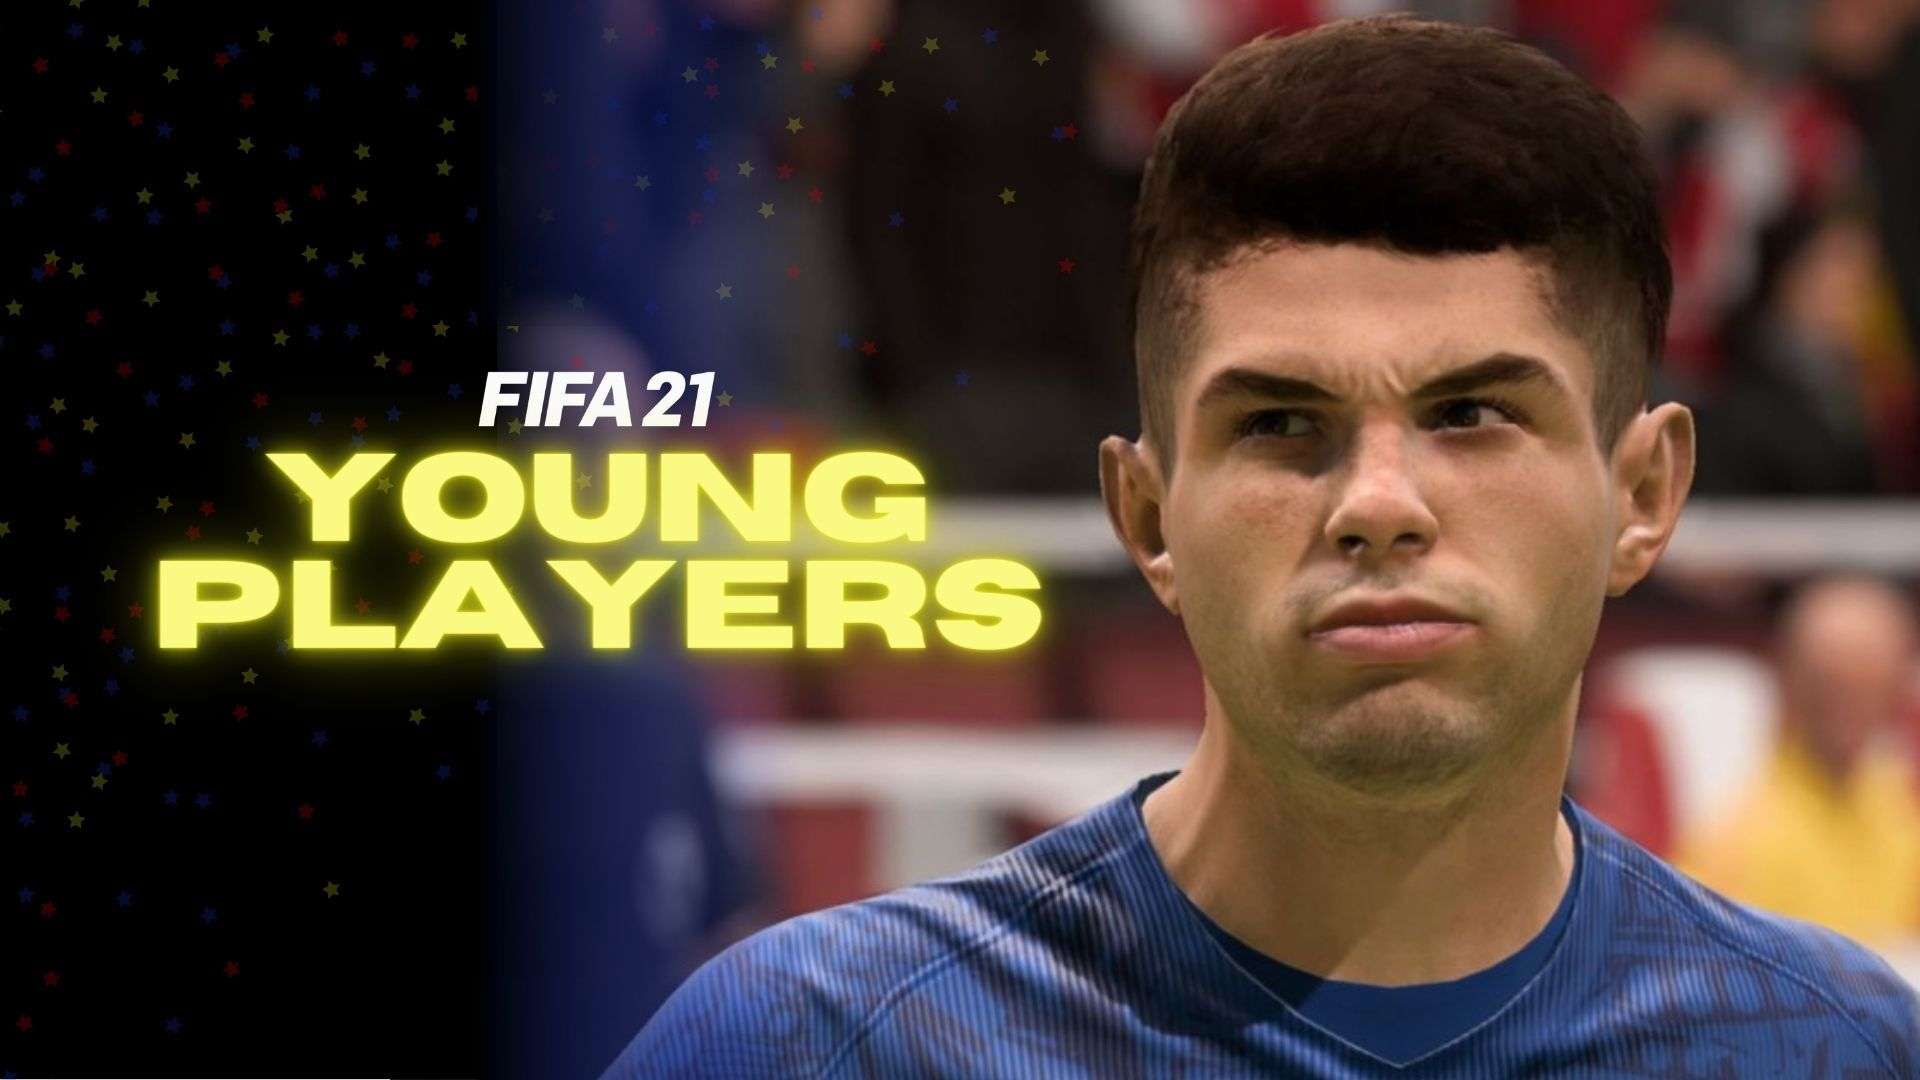 FIFA 21 young player